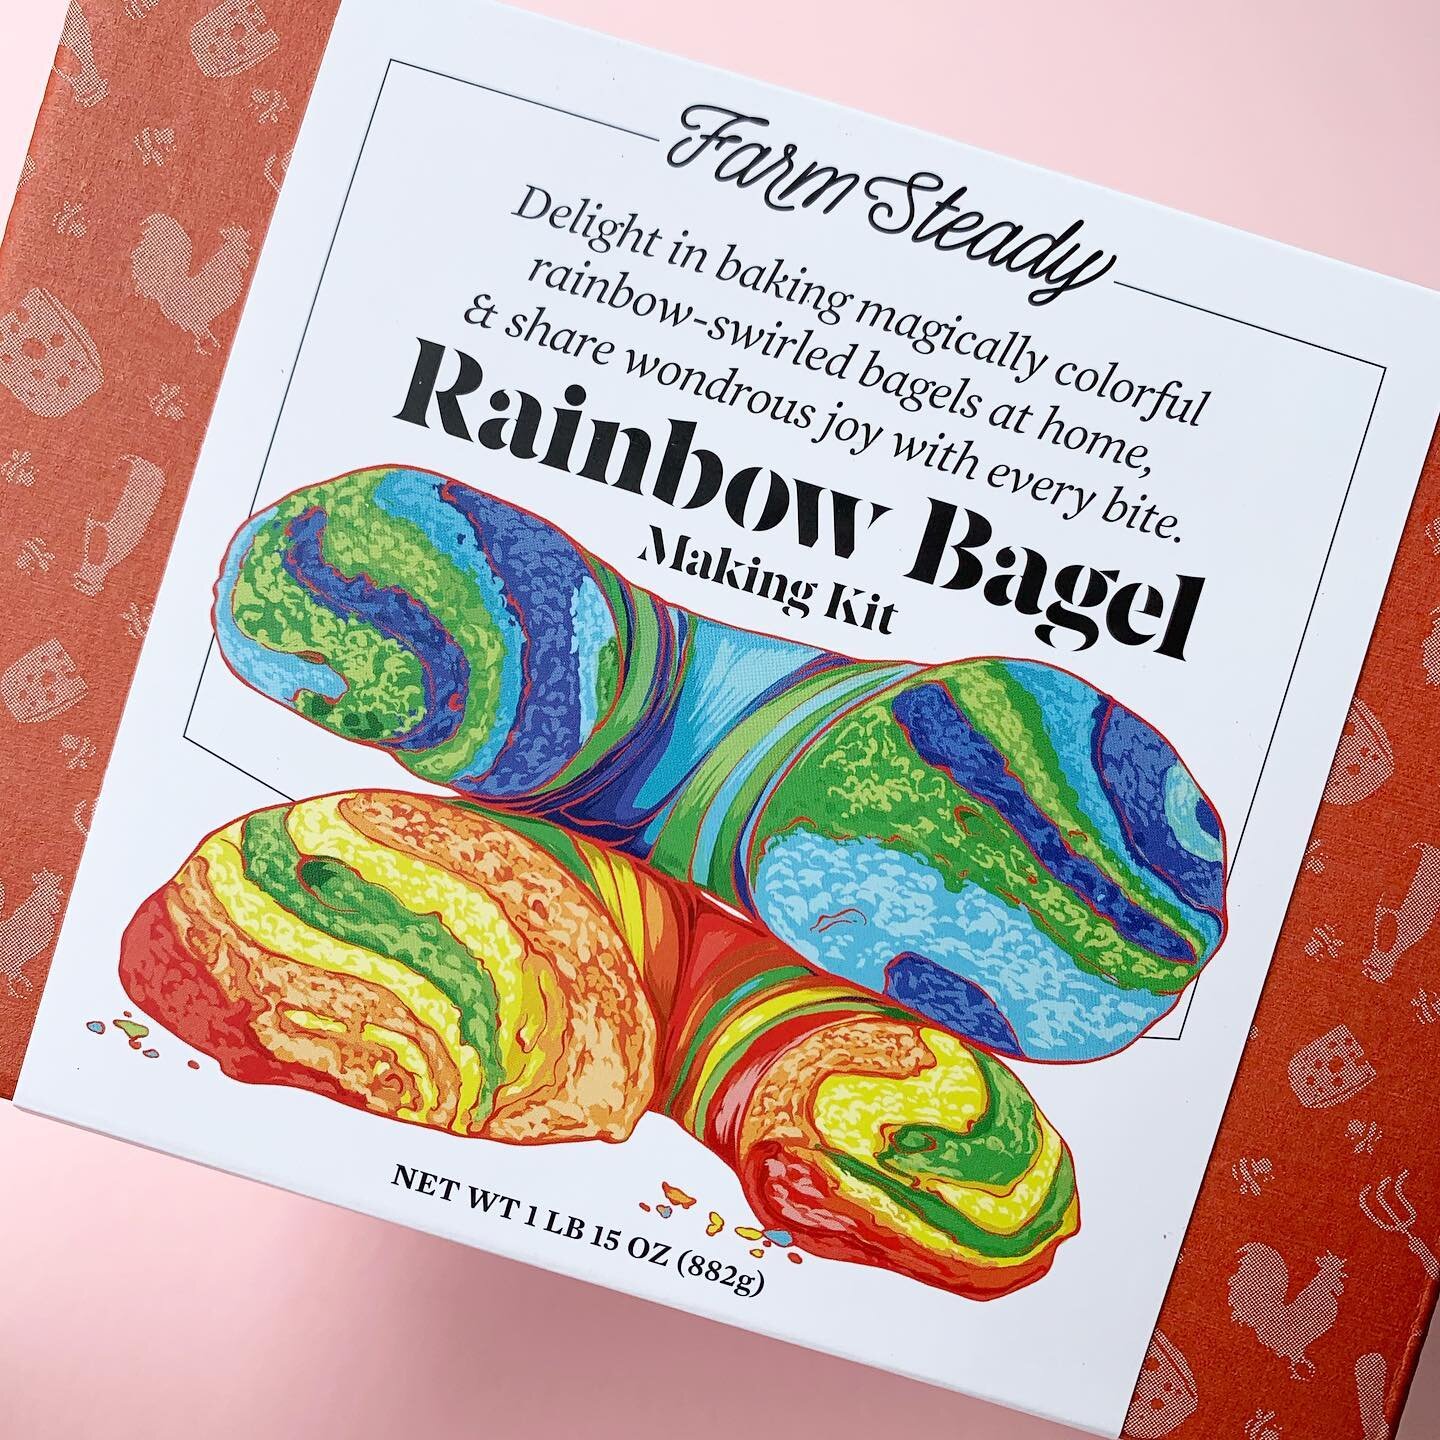 🌈 Rainbow Bagel Kit ❤️🧡💛💚💙💜🤎🖤 Super fun activity to do with kids and grown ups alike! Makes a great Fathers Day, graduation, teacher, or pride gift. Happy to gift wrap it and ship directly to your loved ones - just leave me a note a check out